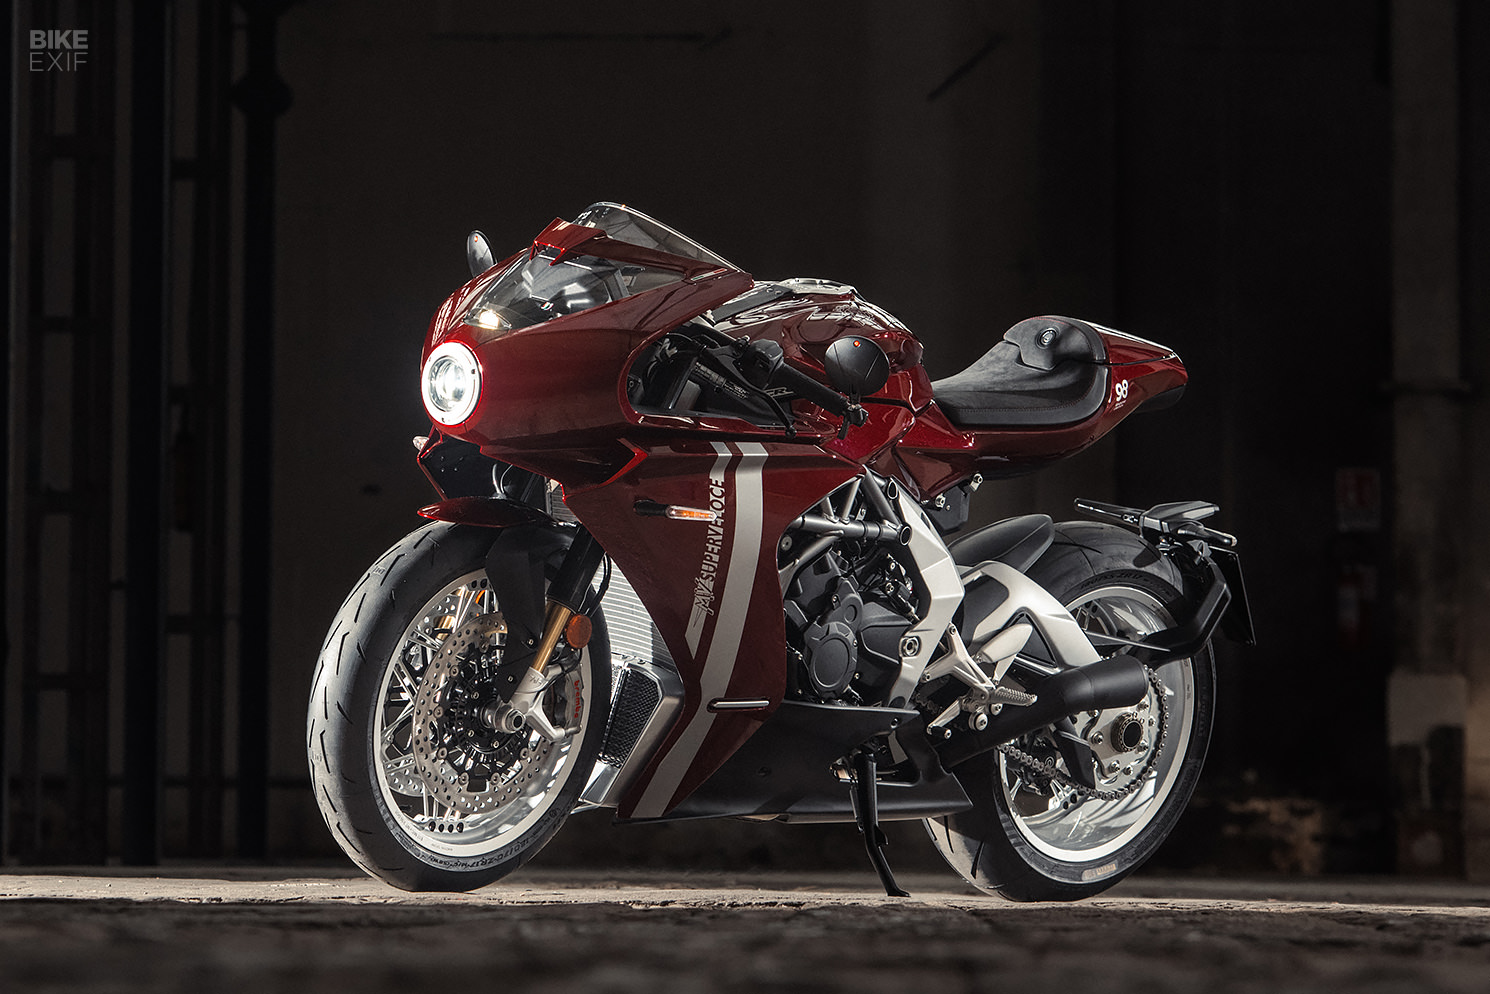 MV Agusta Dragster - 3-Cylinder Engine - Italian Motorcycle